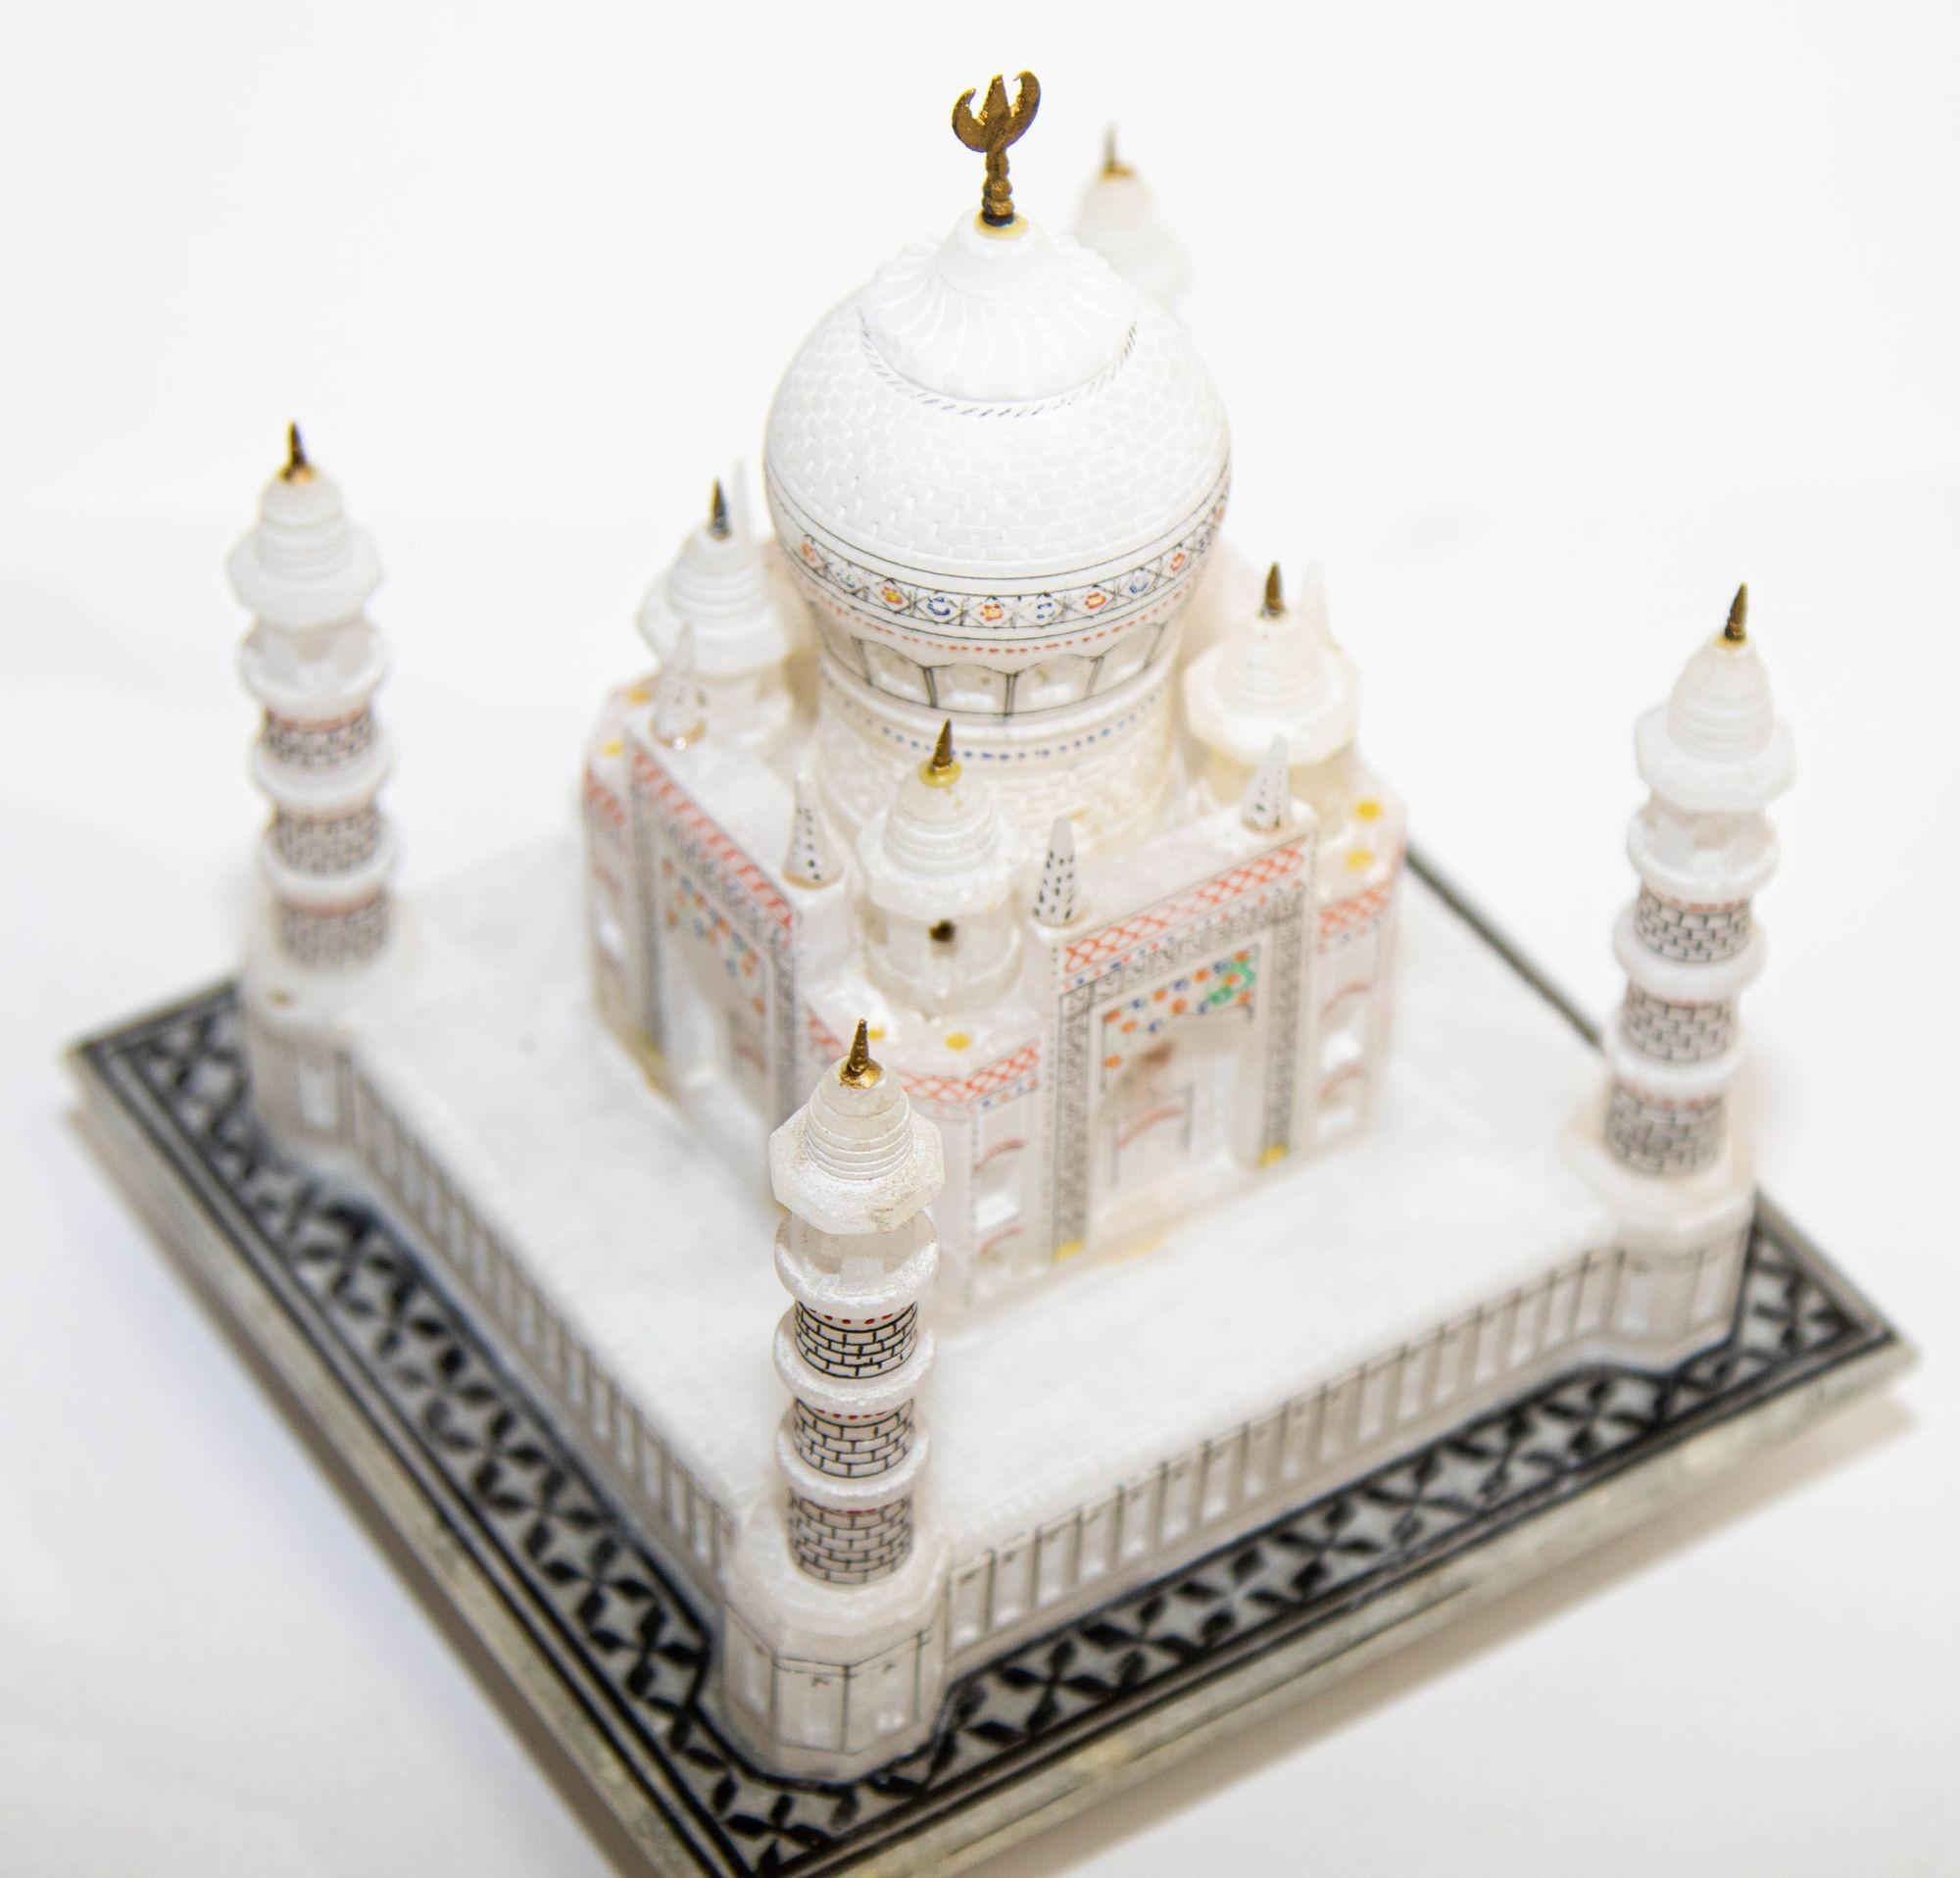 Taj Mahal White Marble Hand-Crafted Collectible Miniature Model For Sale 1